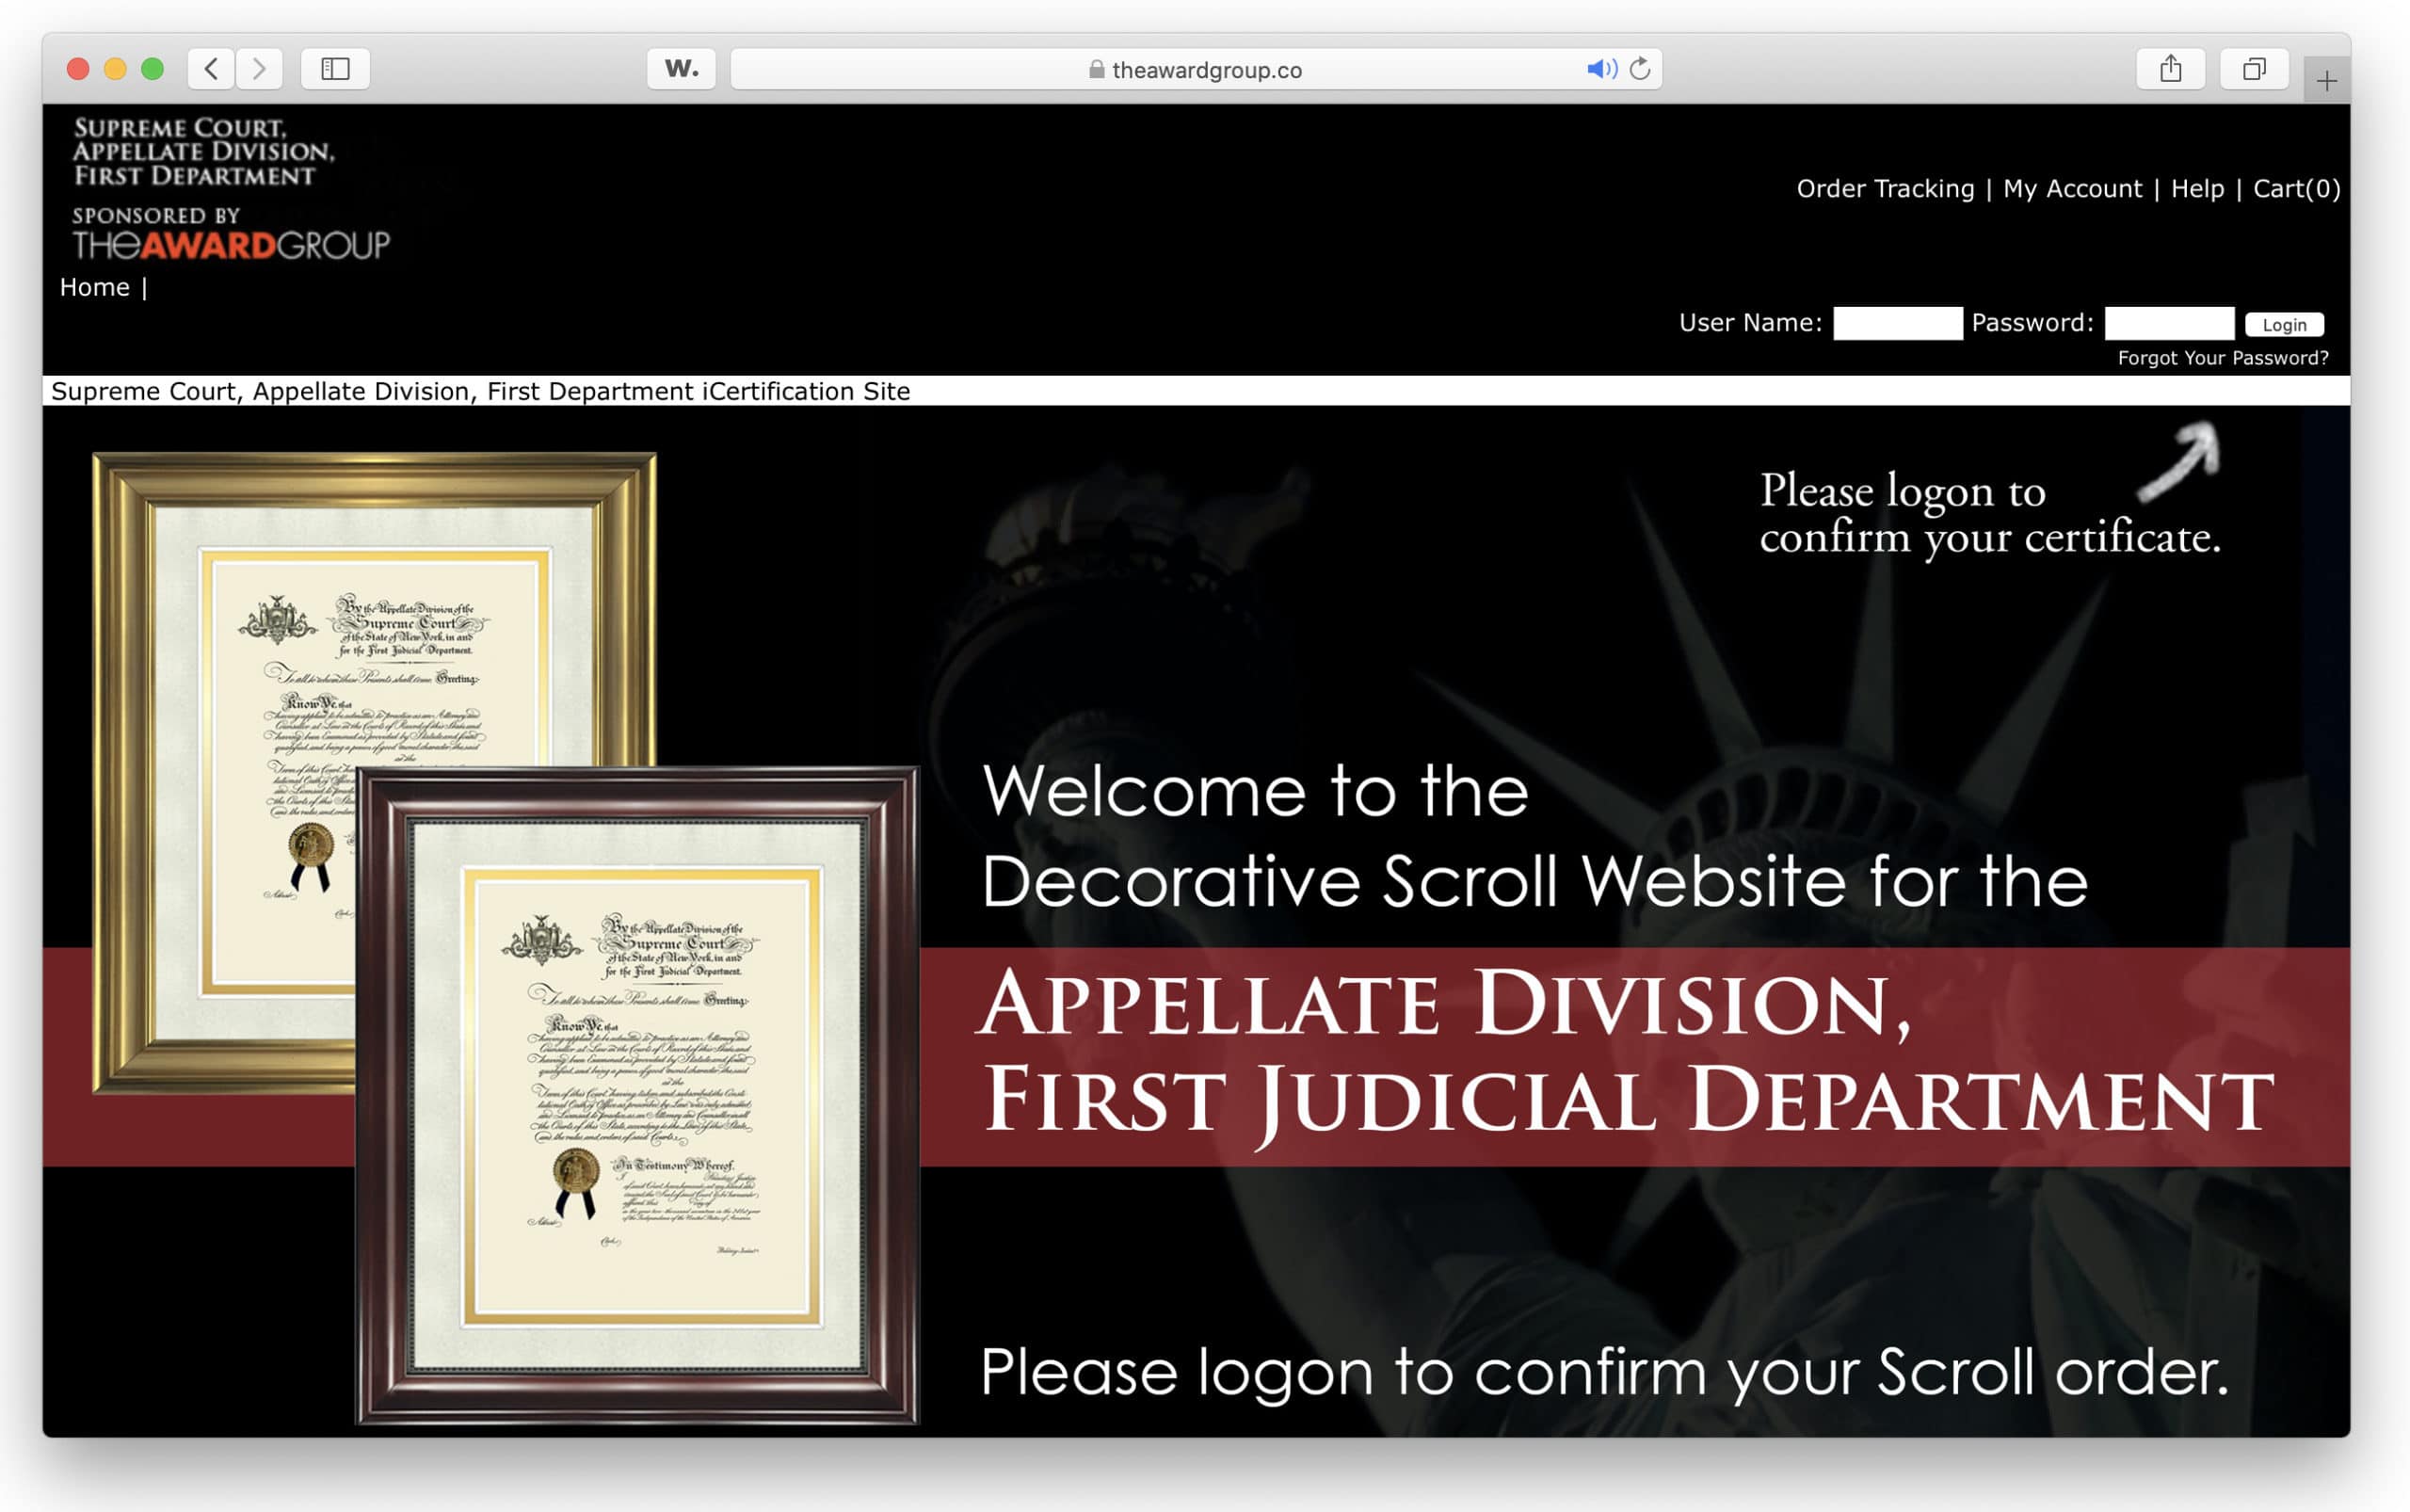 Supreme Court Appellate Division Awards